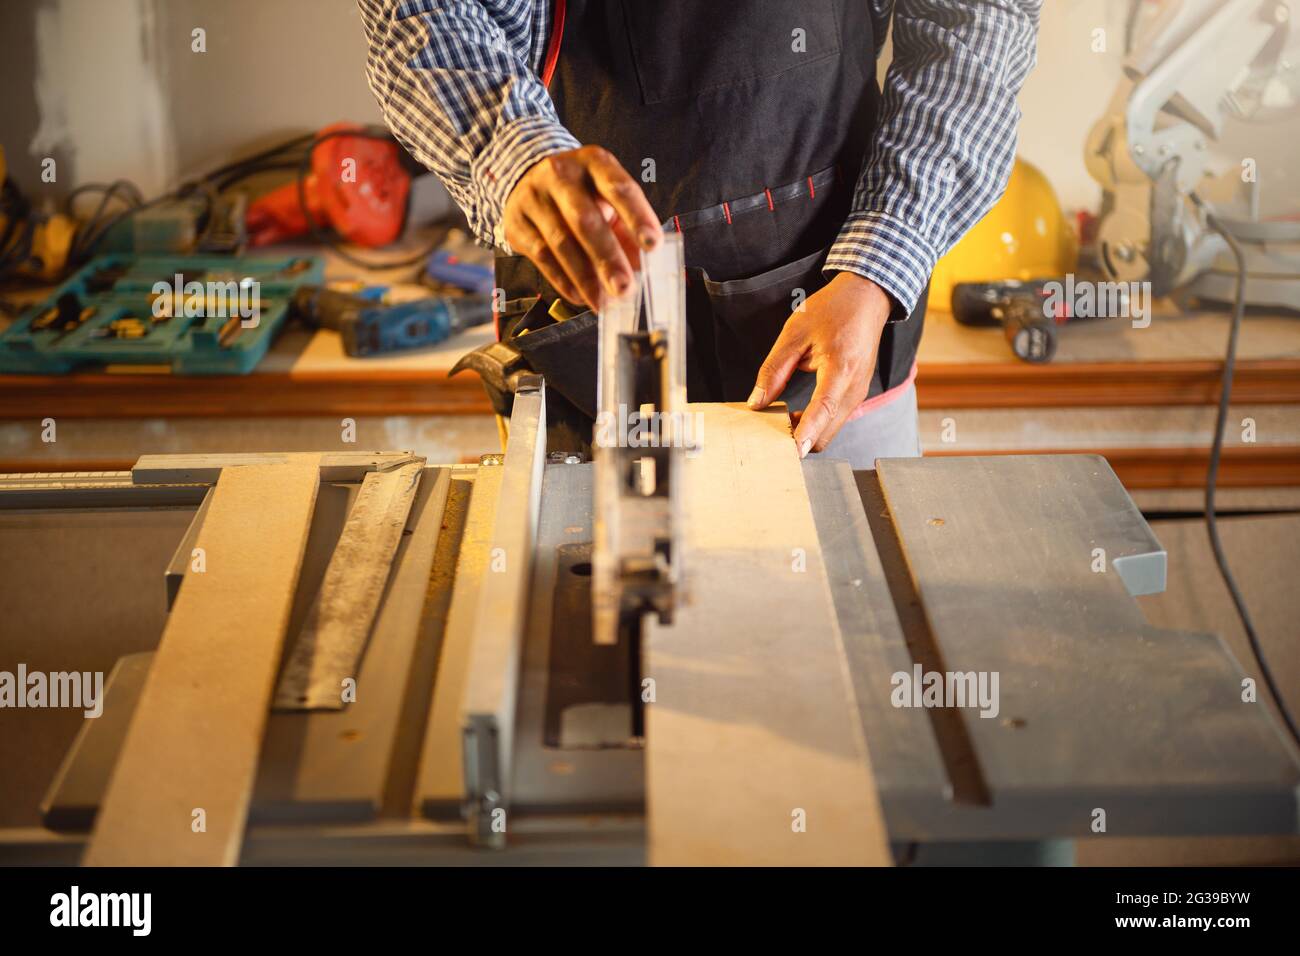 Carpenter working with equipment on wooden table in carpentry Stock Photo